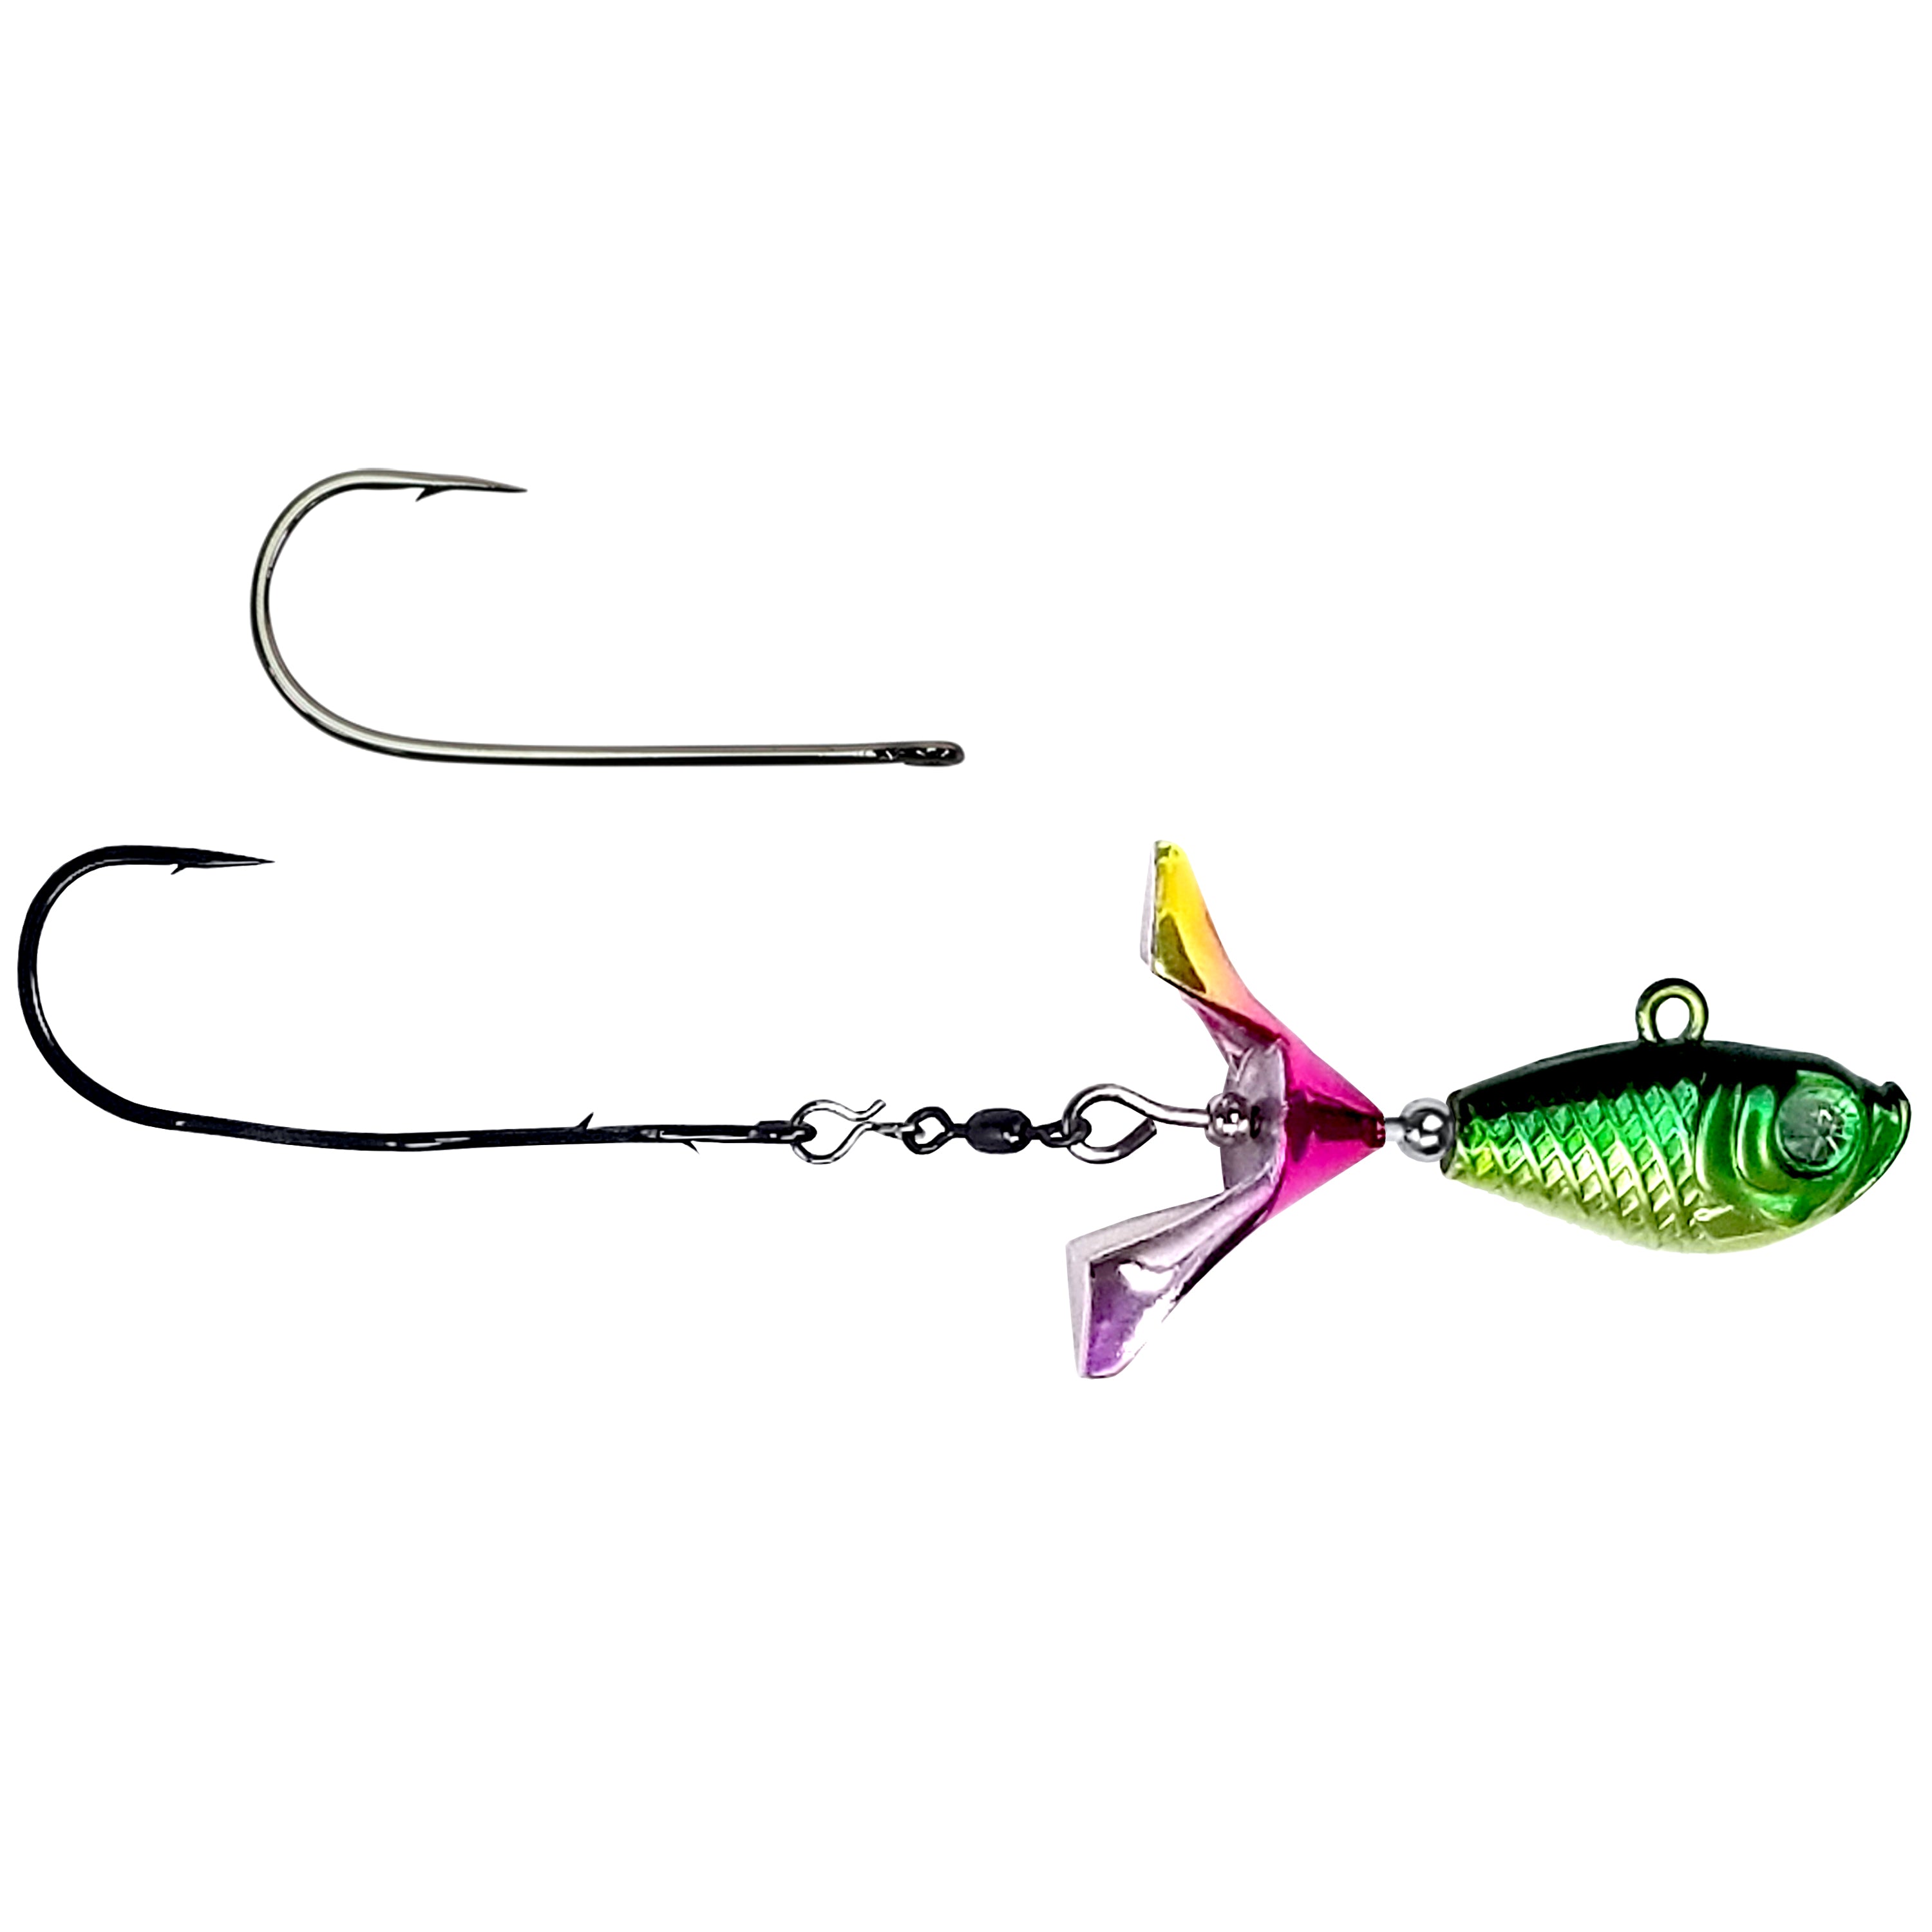 Freshwater fishing lures - general for sale - by owner - craigslist